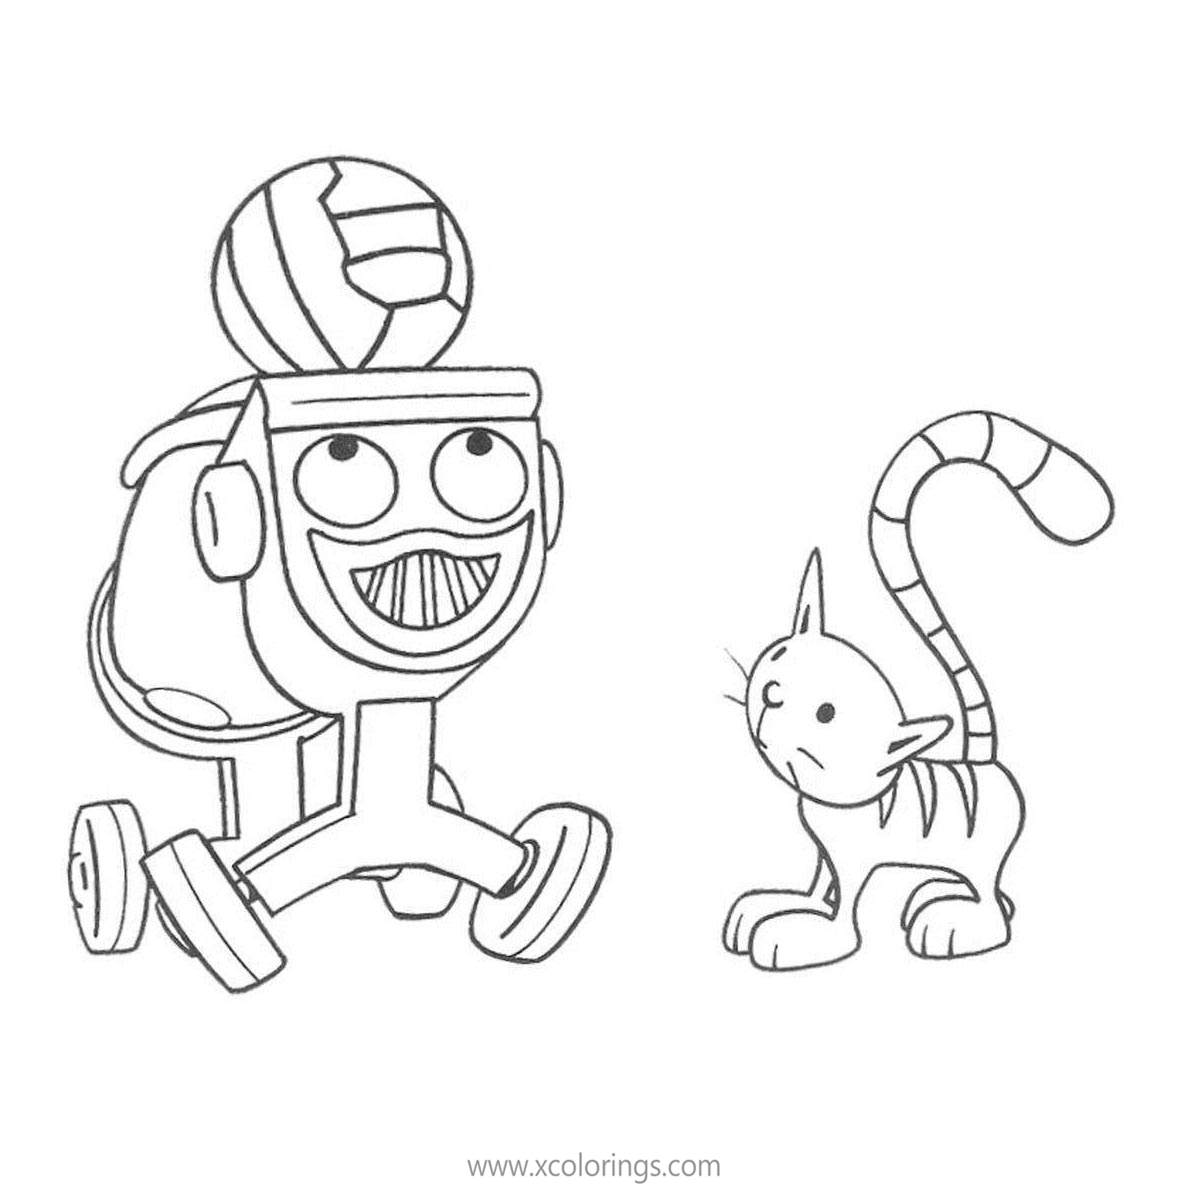 bob-the-builder-coloring-pages-dizzy-is-playing-a-ball-xcolorings